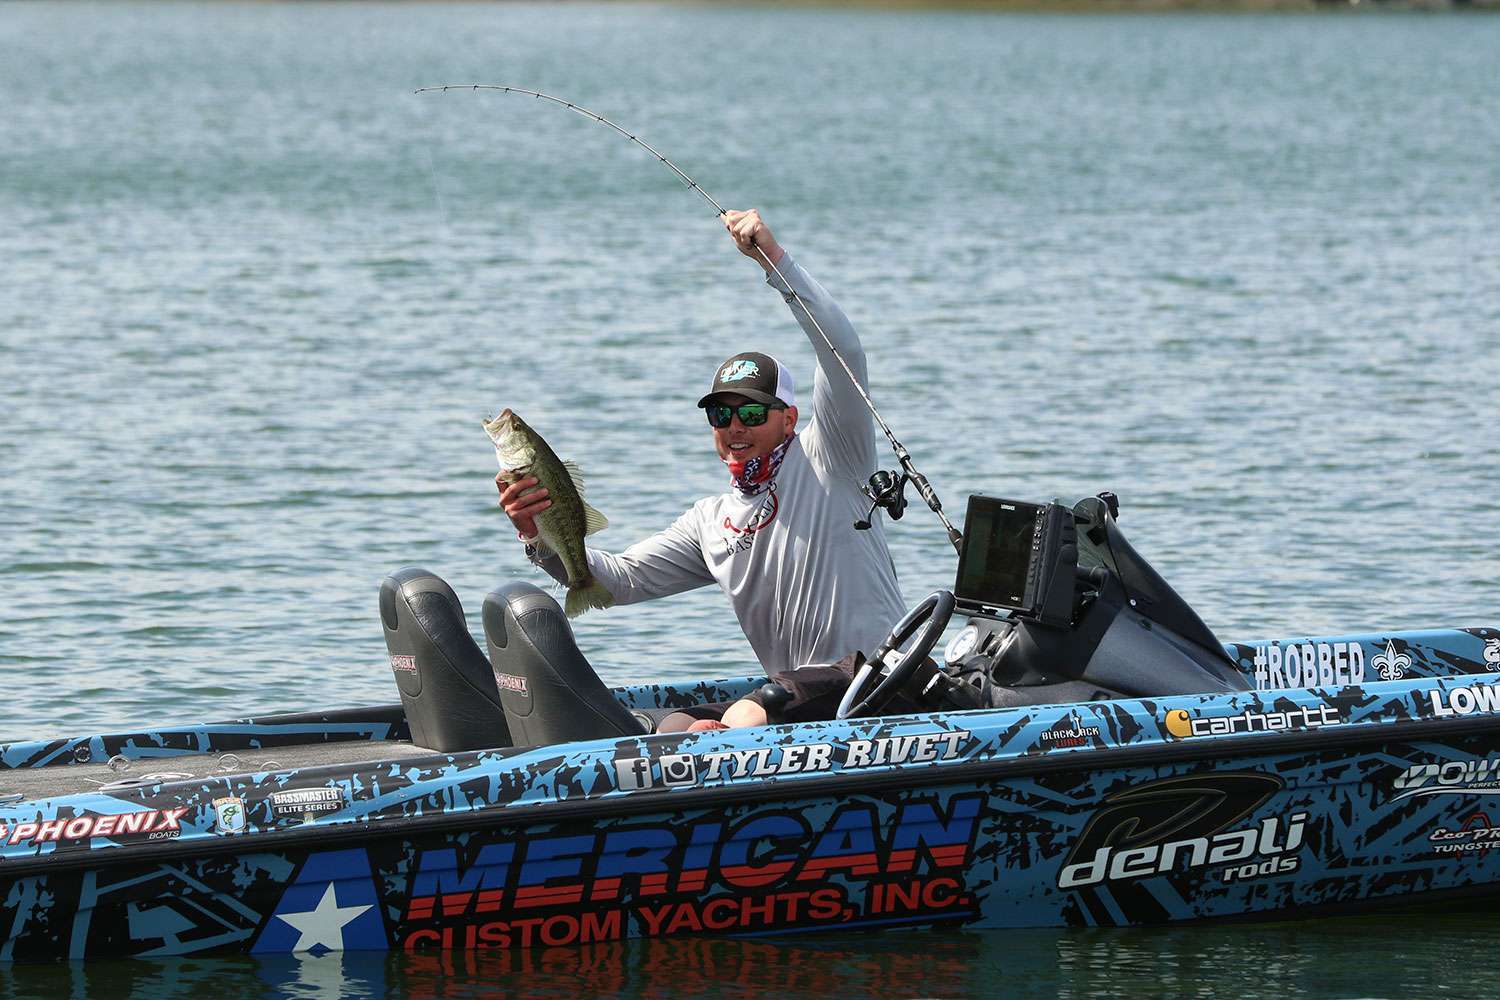 Since then it made me want to get back to that moment every year and try to make that Classic. I knew I had it in me just things kept messing up at least one day in the Championships. We would place high but was always just that one fish out from making it again. So that just got me mad in a different way. I saw how close I was, but how far I needed to come to accomplish my goal.